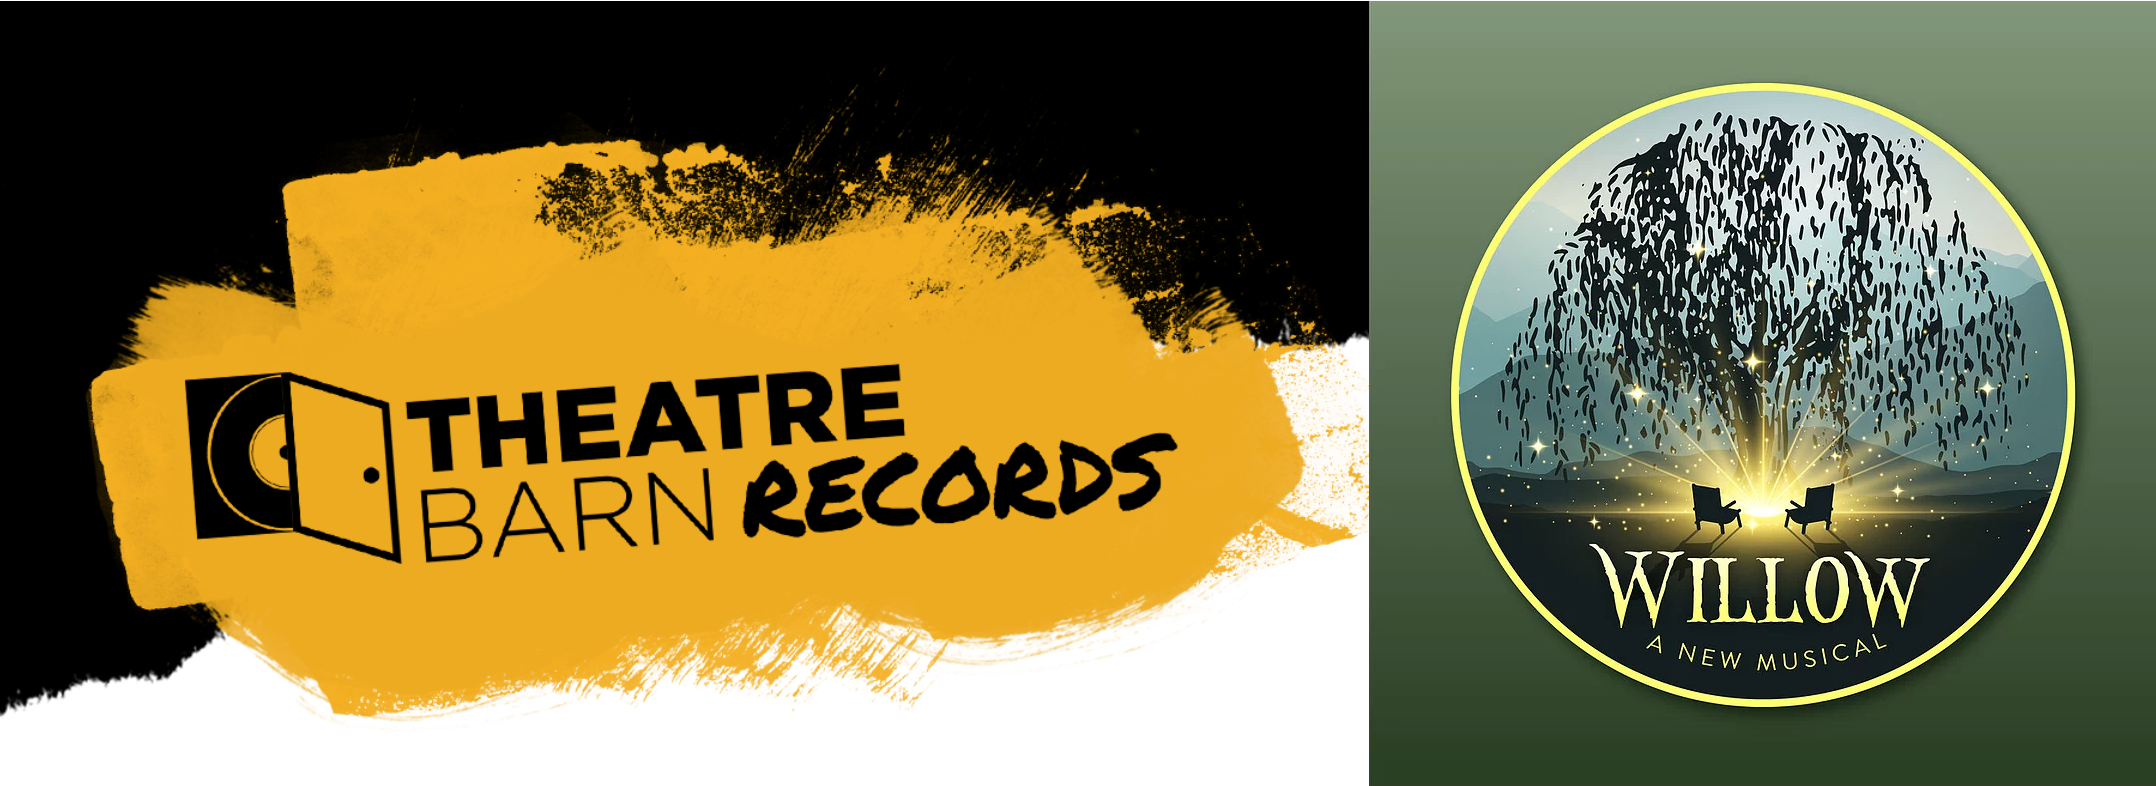 New York Theatre Barn Launches Theatre Barn Records & Releases 1st Album WILLOW Featuring Christy Altomare & More 